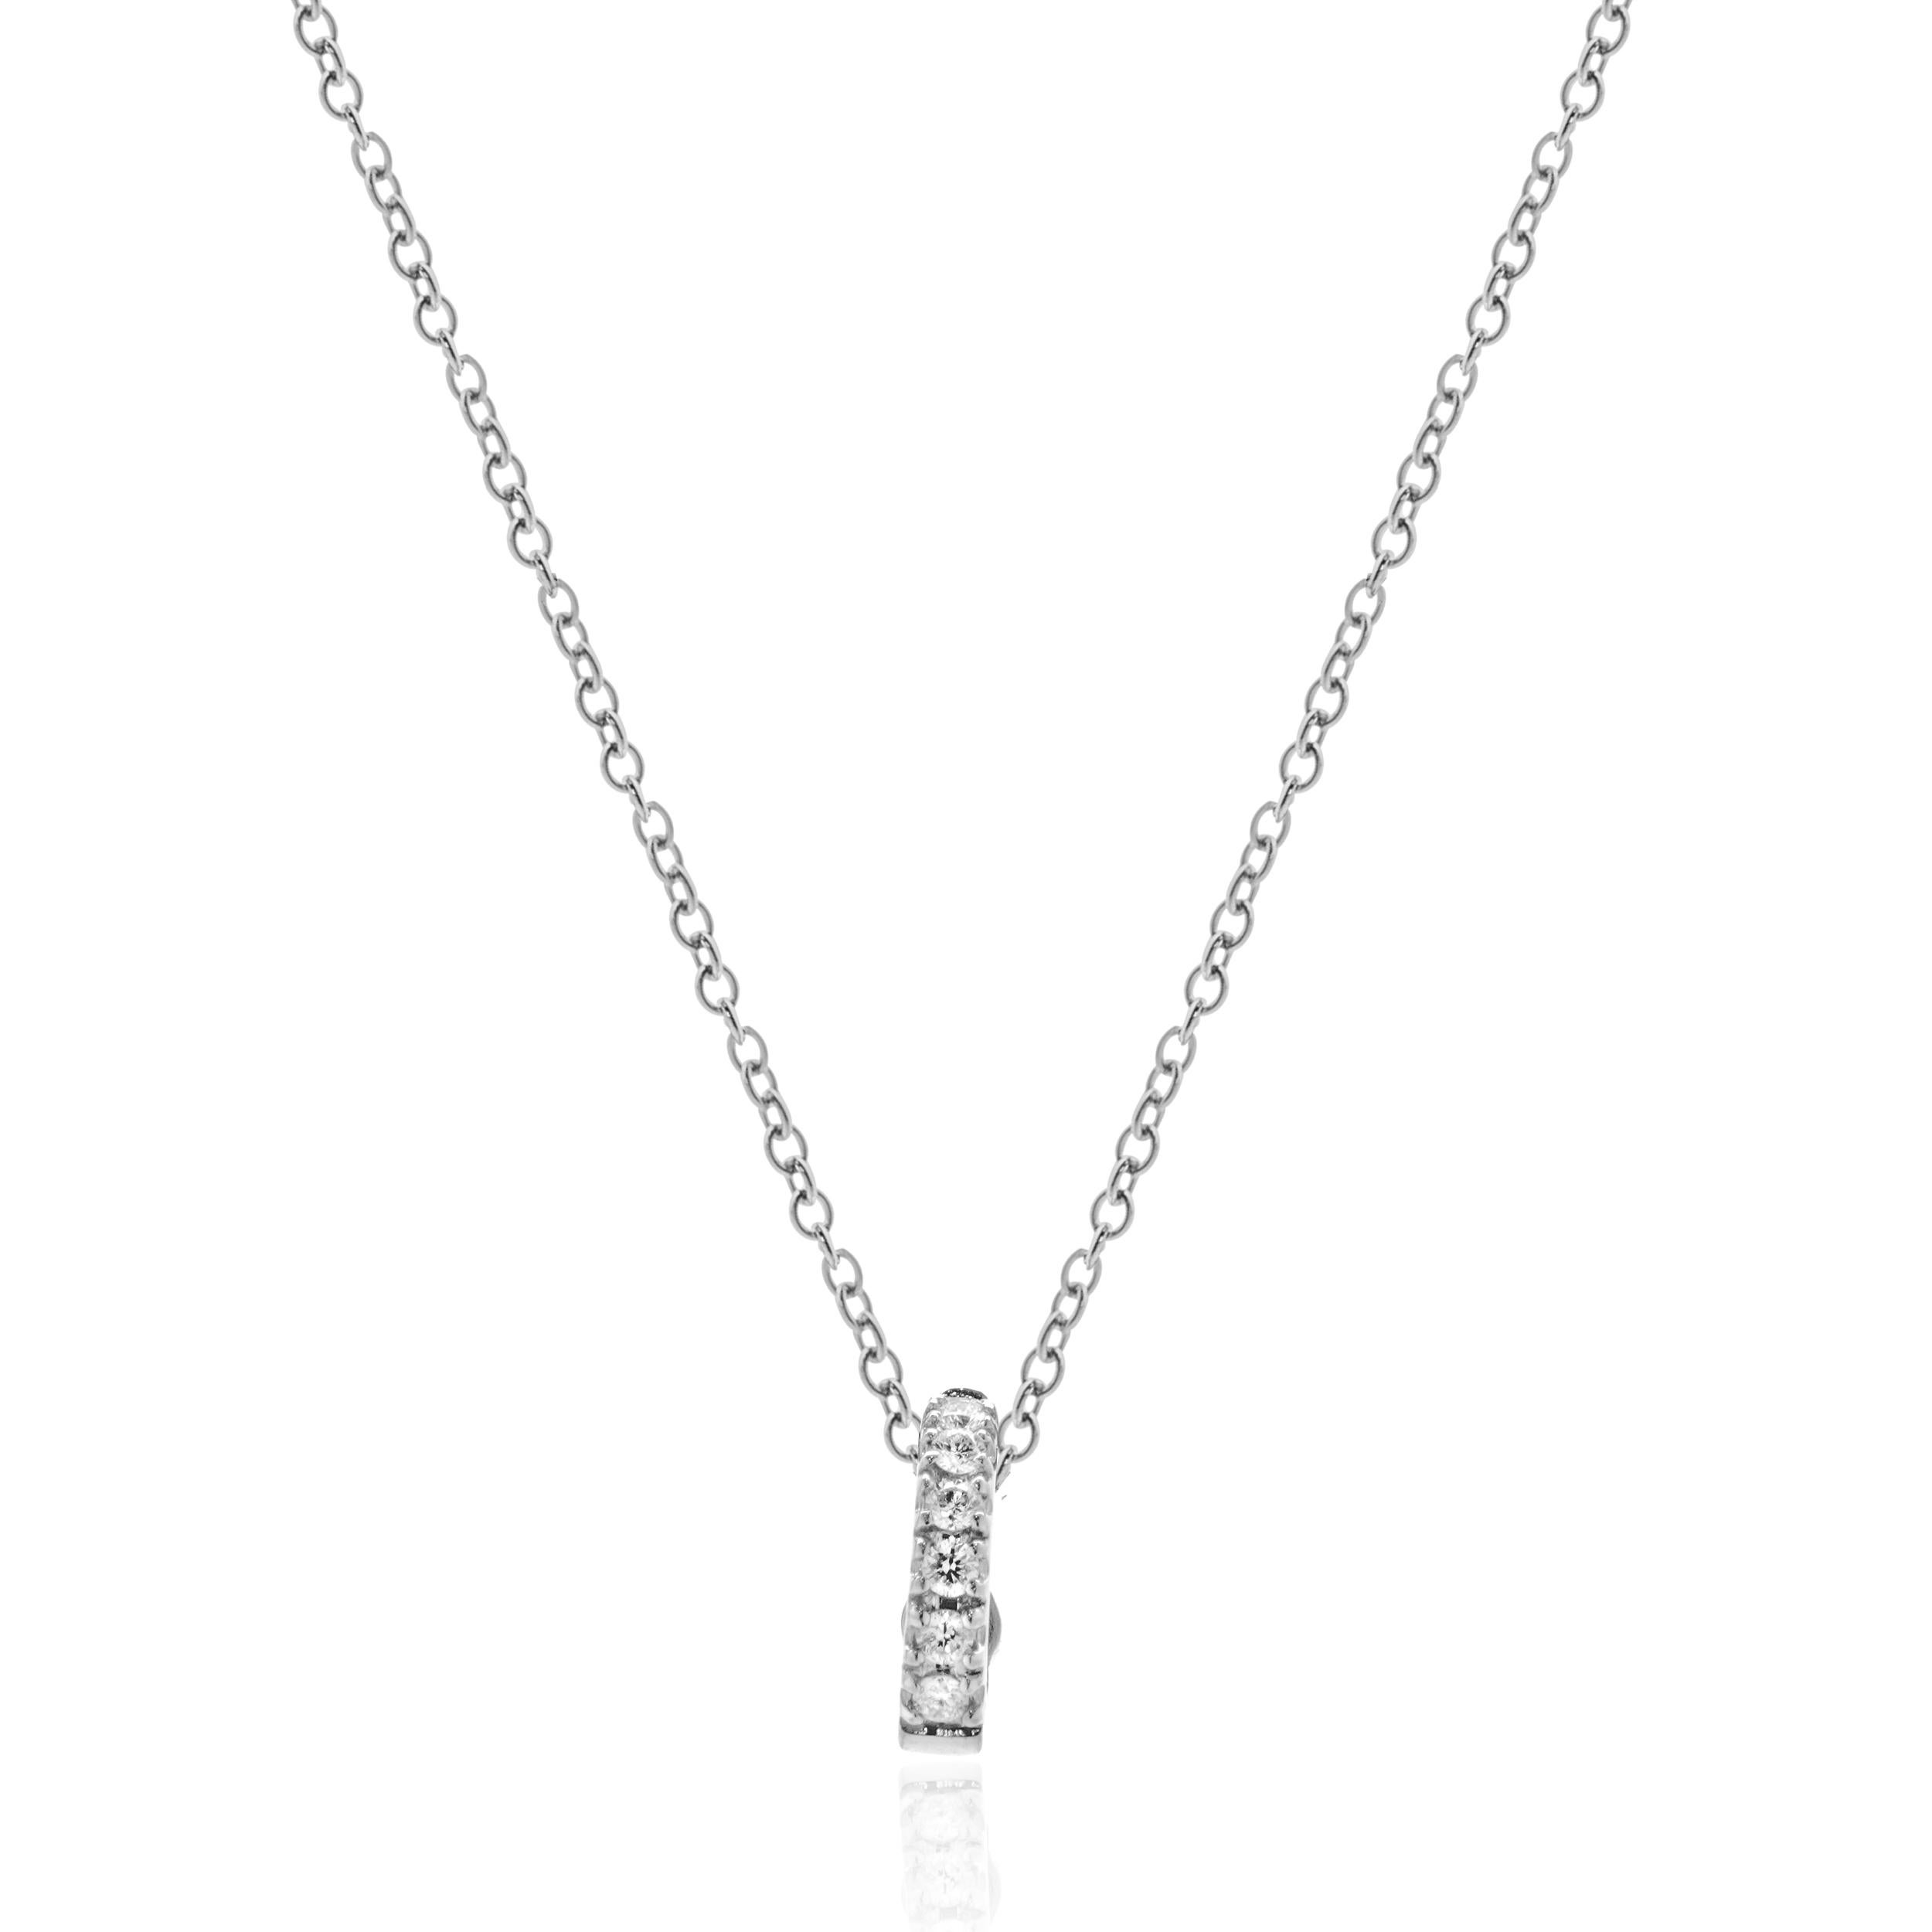 Designer: Roberto Coin
Material: 18K white gold
Diamonds: 7 round brilliant cut = 0.07cttw
Color: G
Clarity: VS1-2
Weight: 3.55
Dimensions: necklace measures 18-inches long
